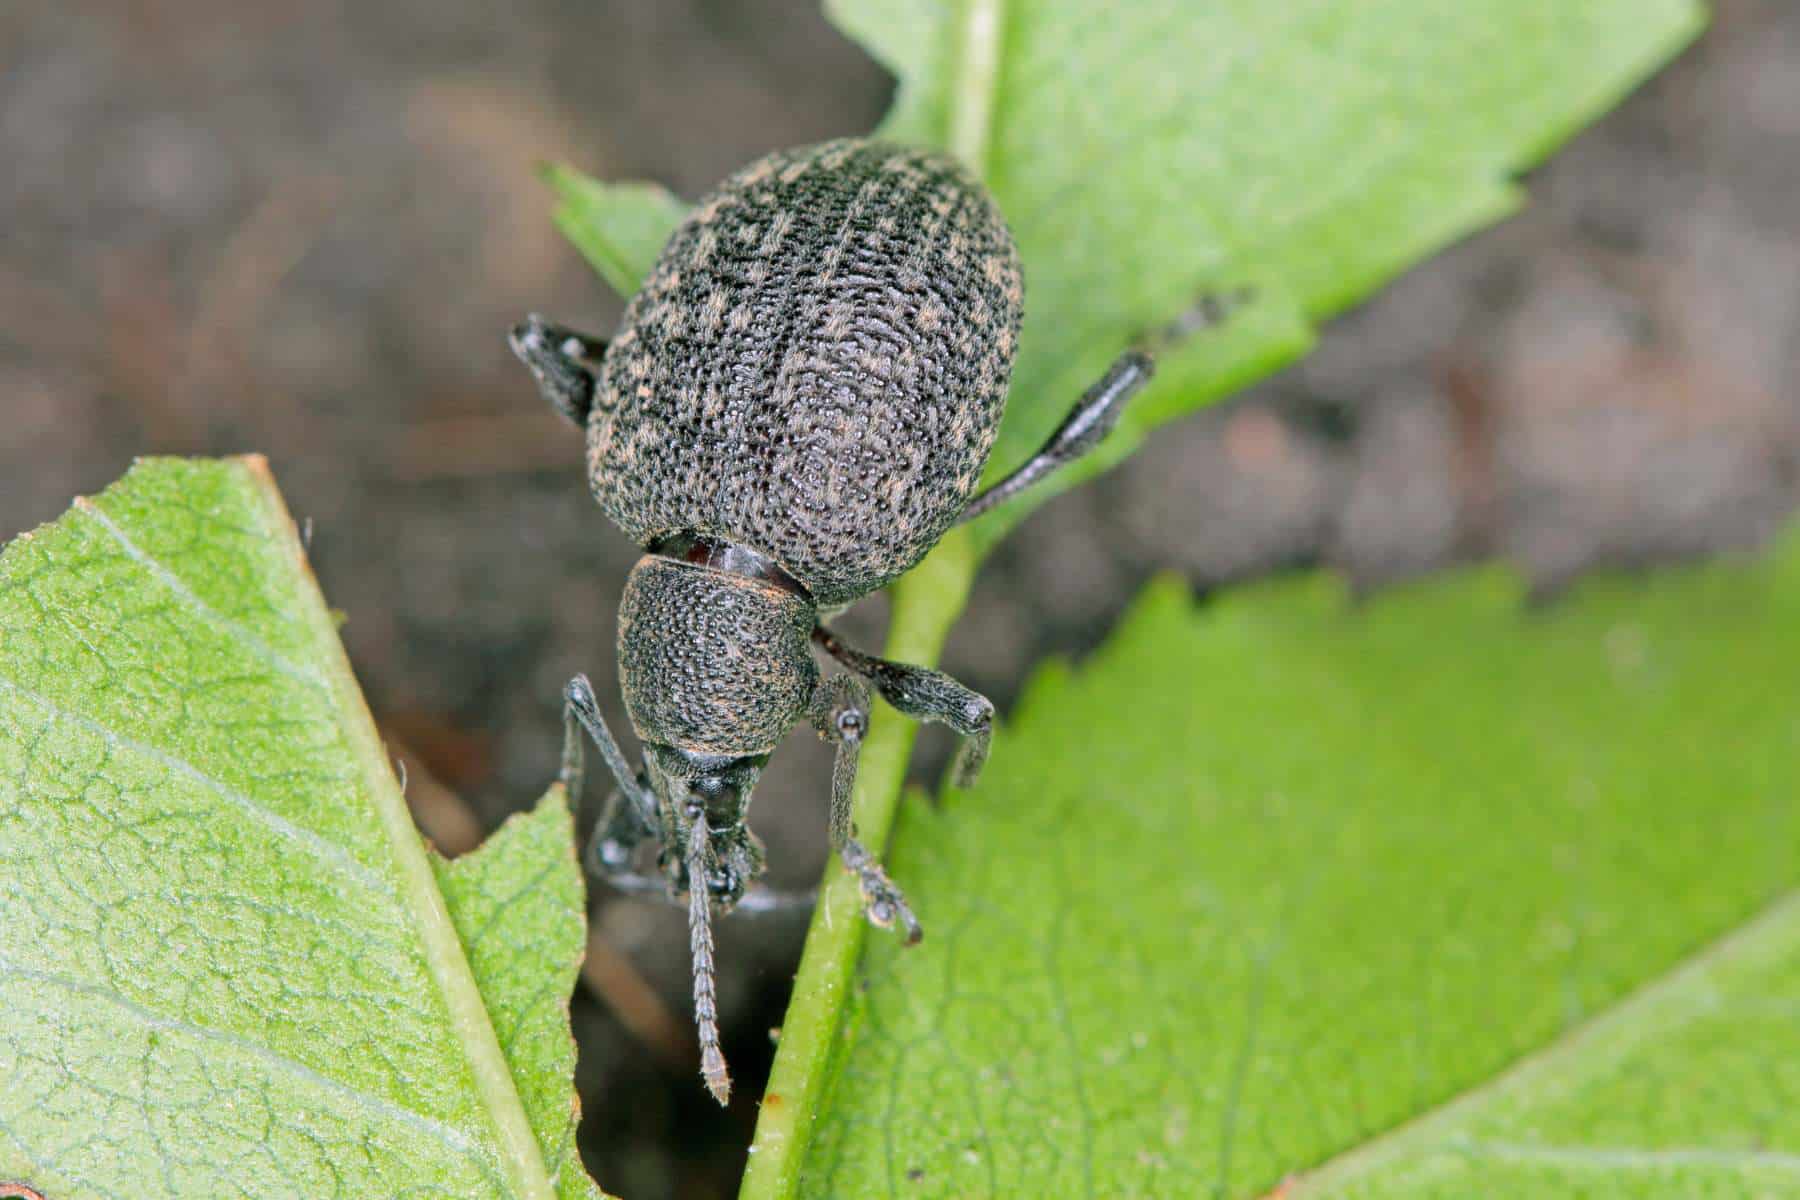 Featured image for “Weevilution: Root Weevil Predatory Nematodes”